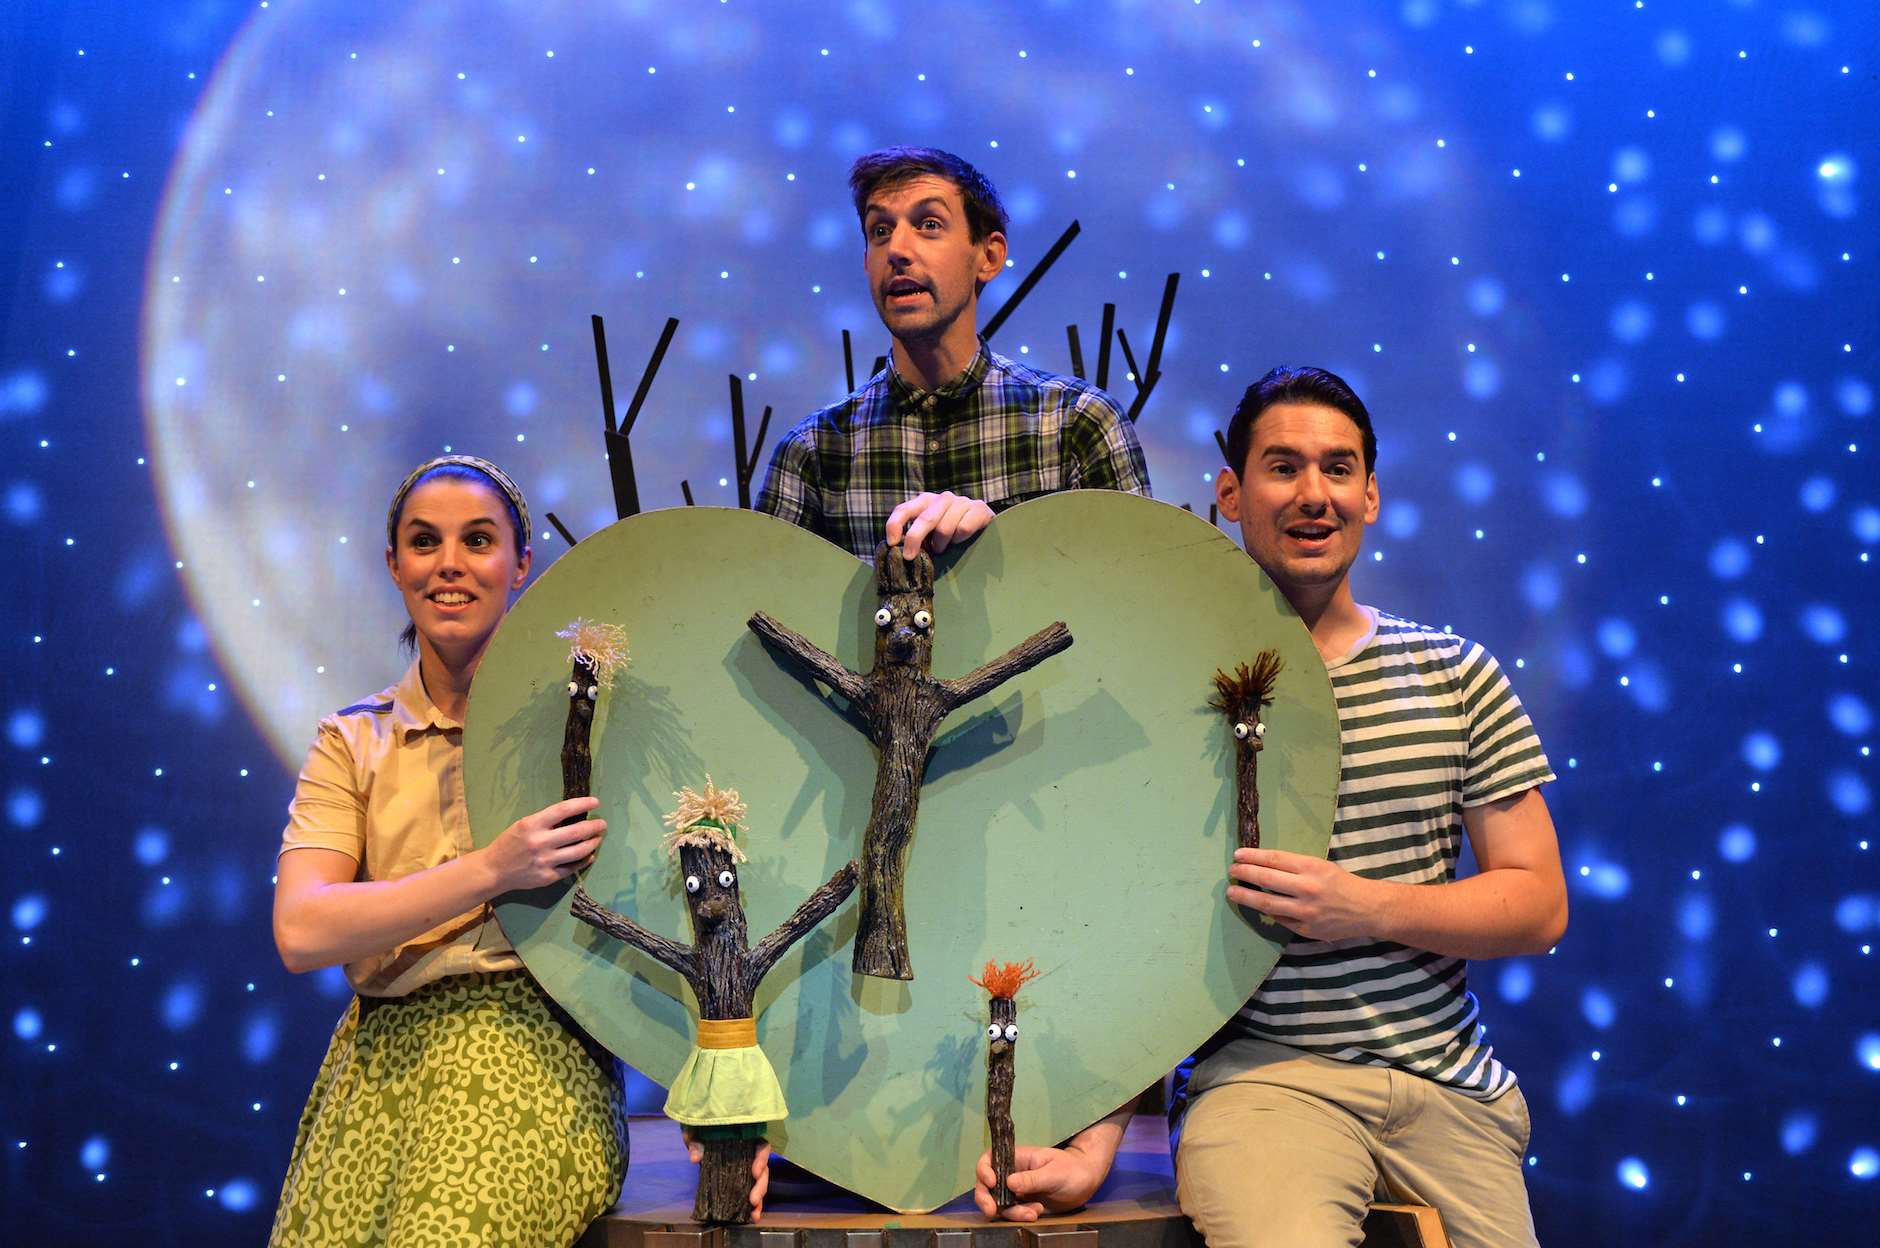 Stick Man, the stage show based on Julia Donaldson's book